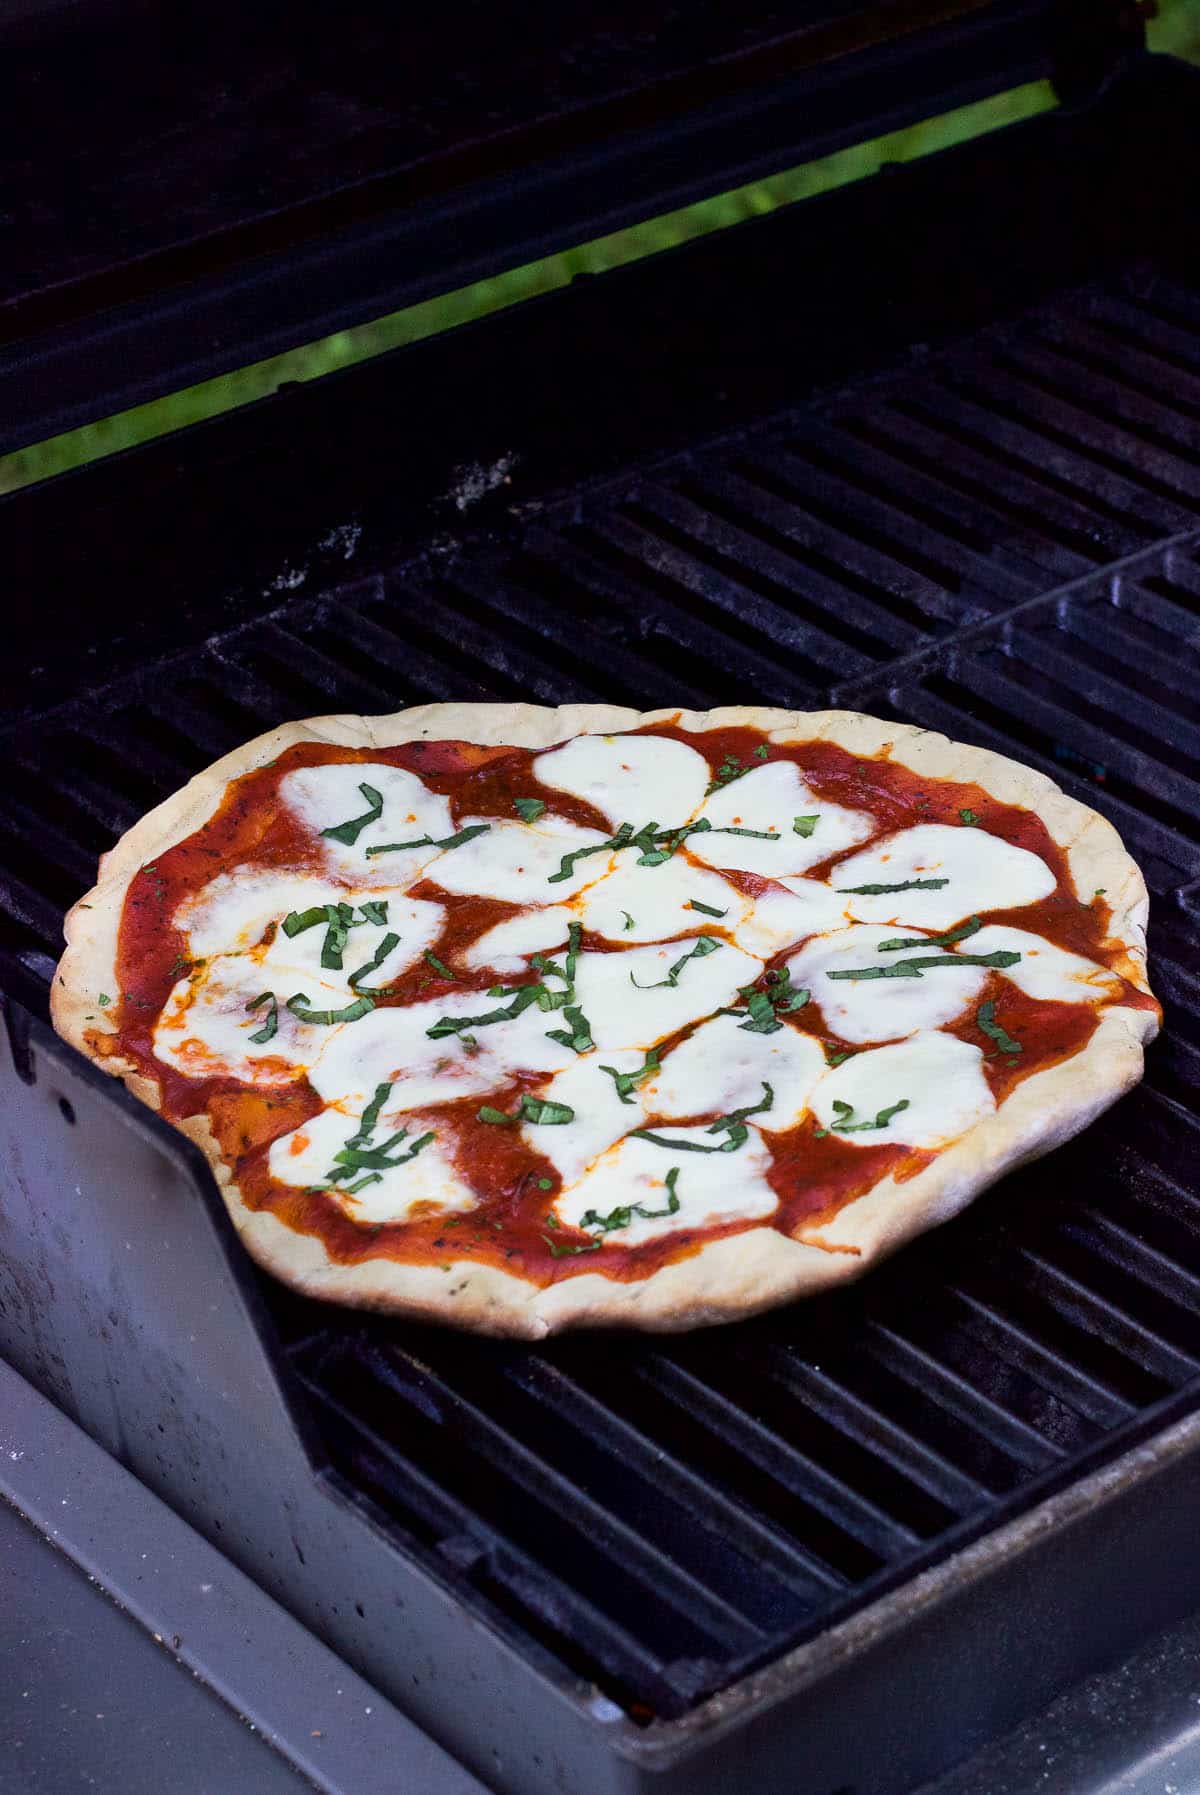 A grilled pizza on the grill just prior to be removed to serve.